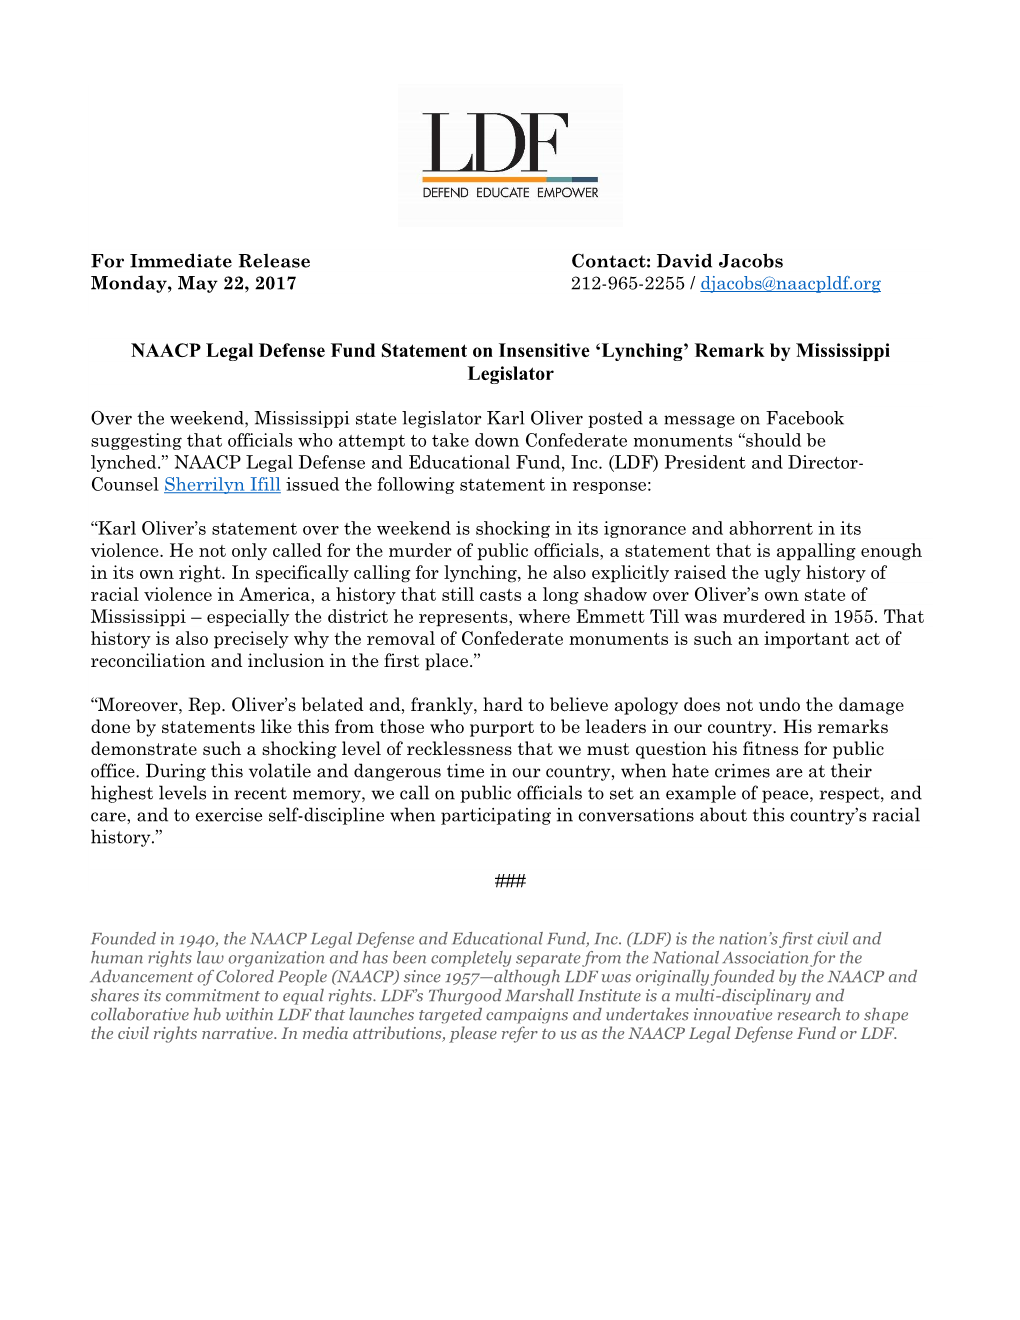 NAACP Legal Defense Fund Statement on Insensitive 'Lynching